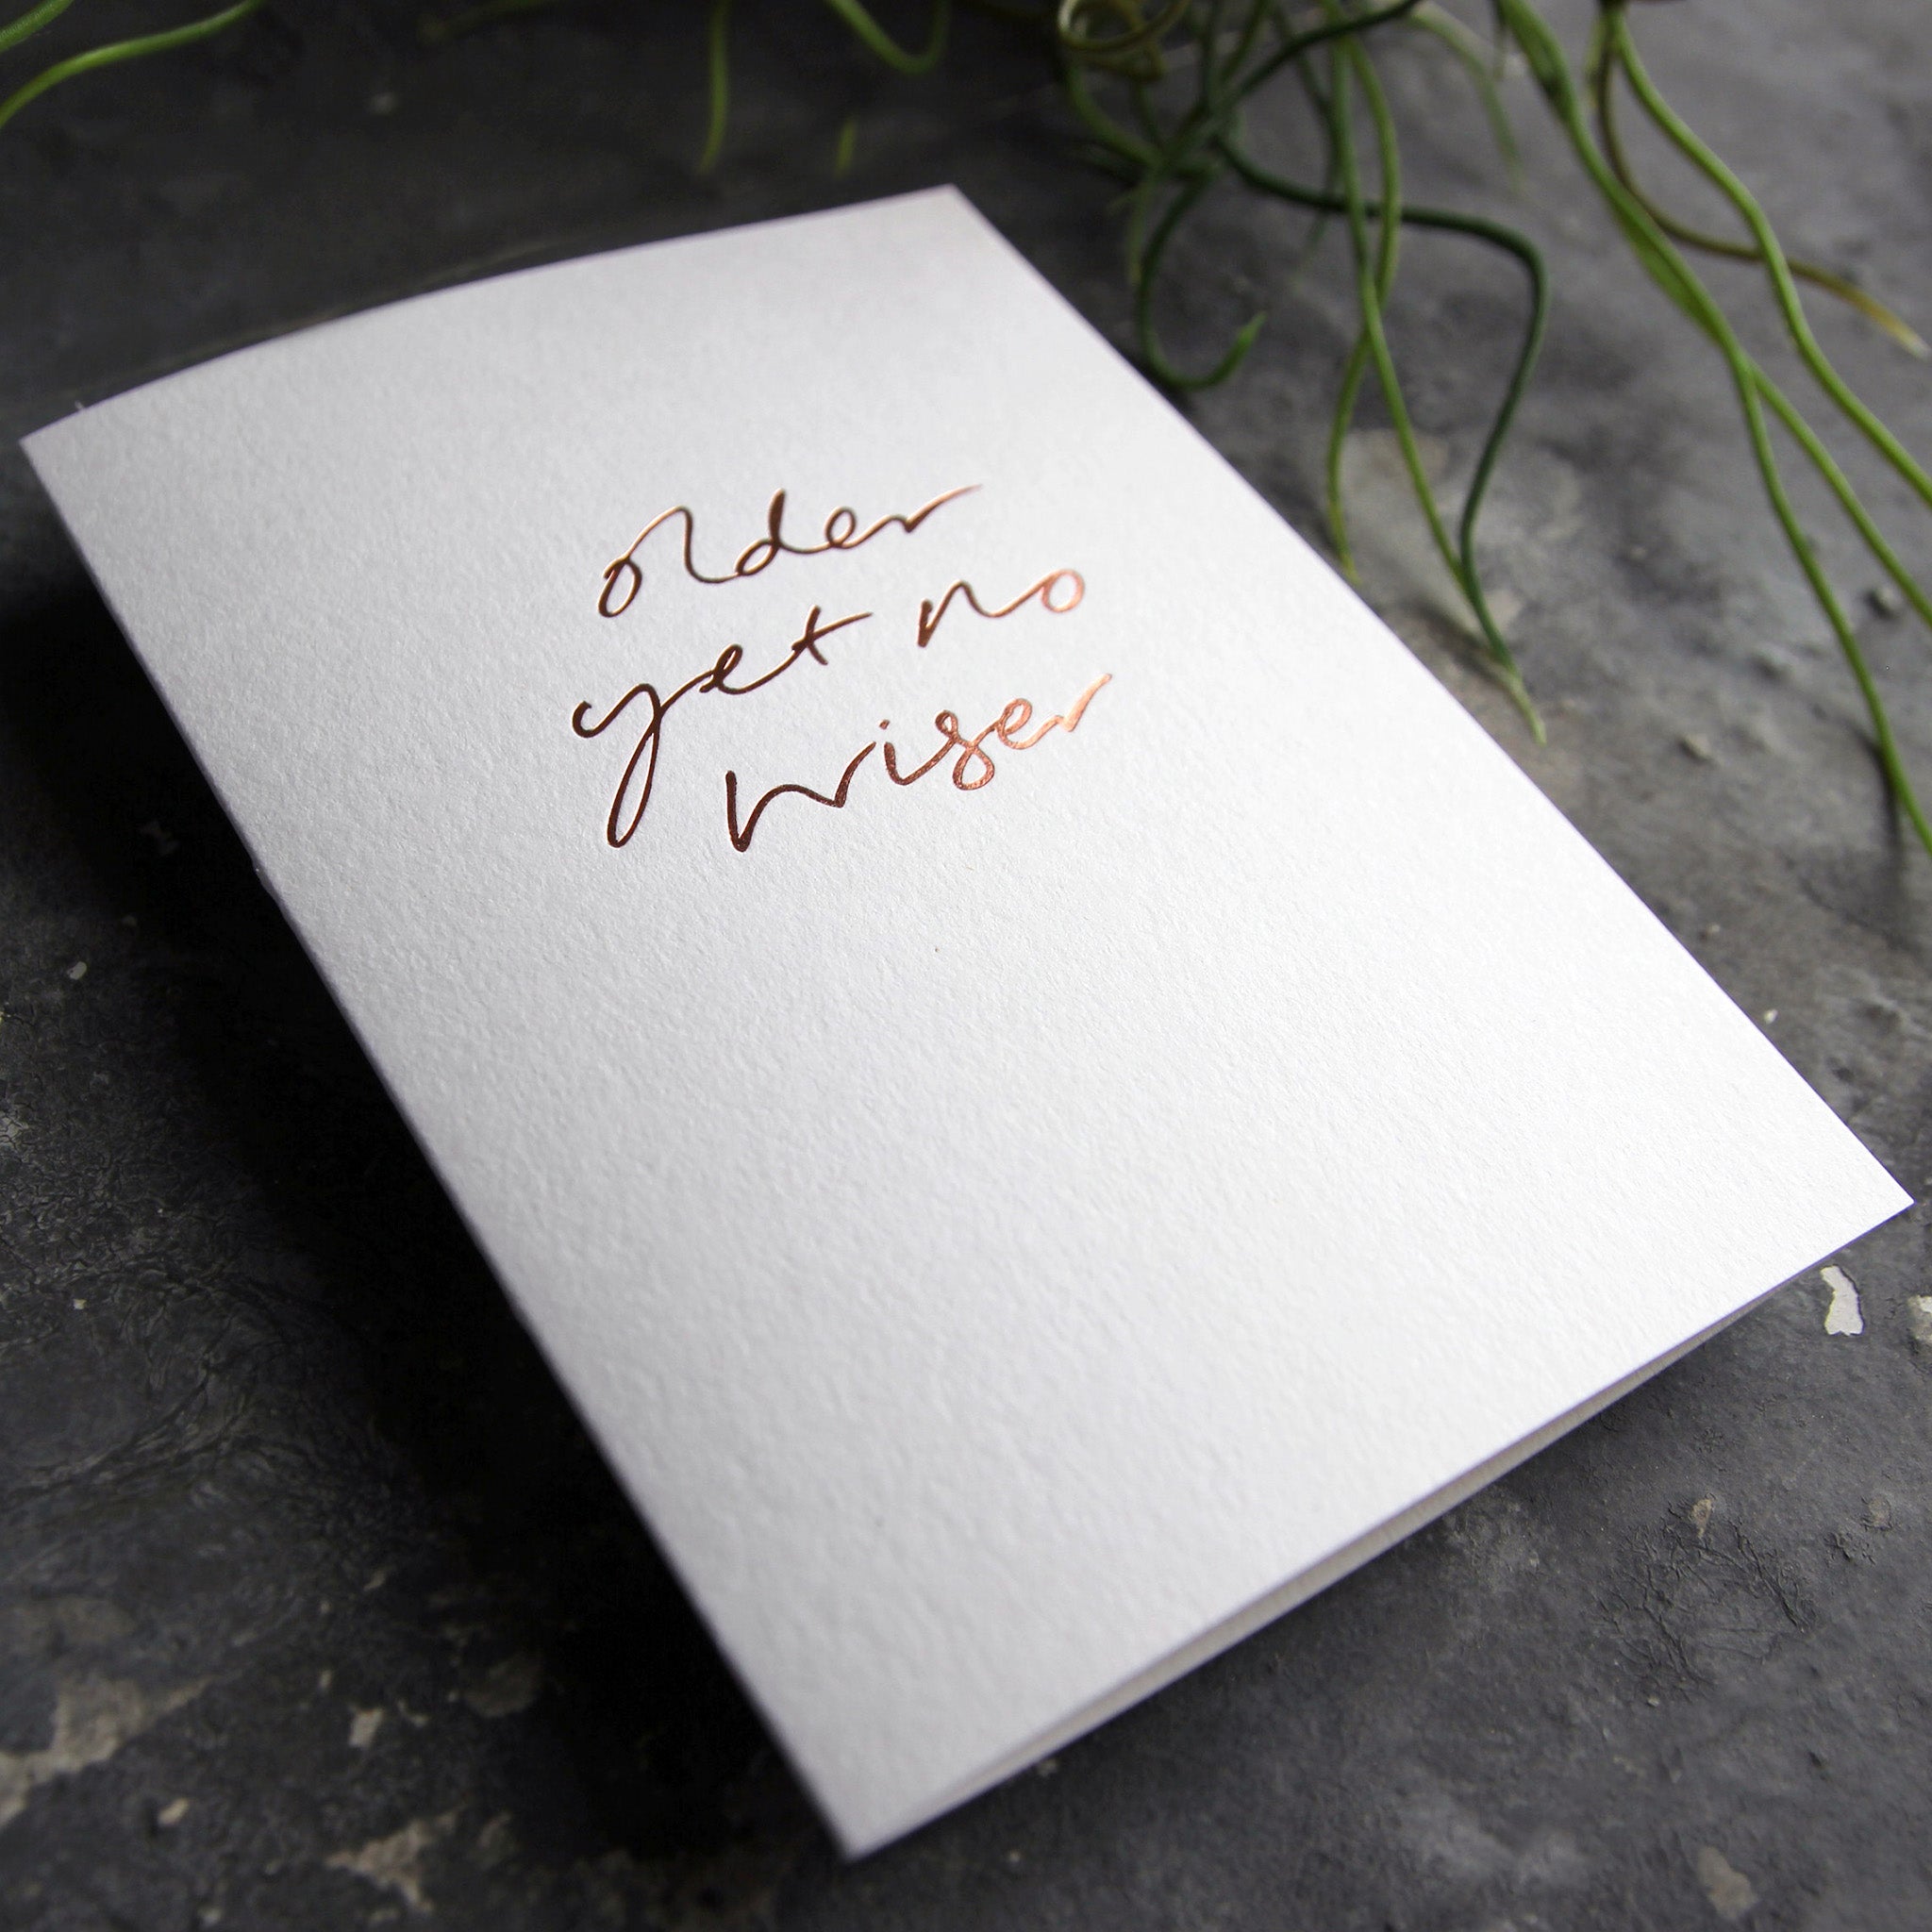 Luxury white greetings card with "Older Yet No Wiser" handwritten in the front and hand printed in rose gold foil on a grey background with some green plant leaves at the side.